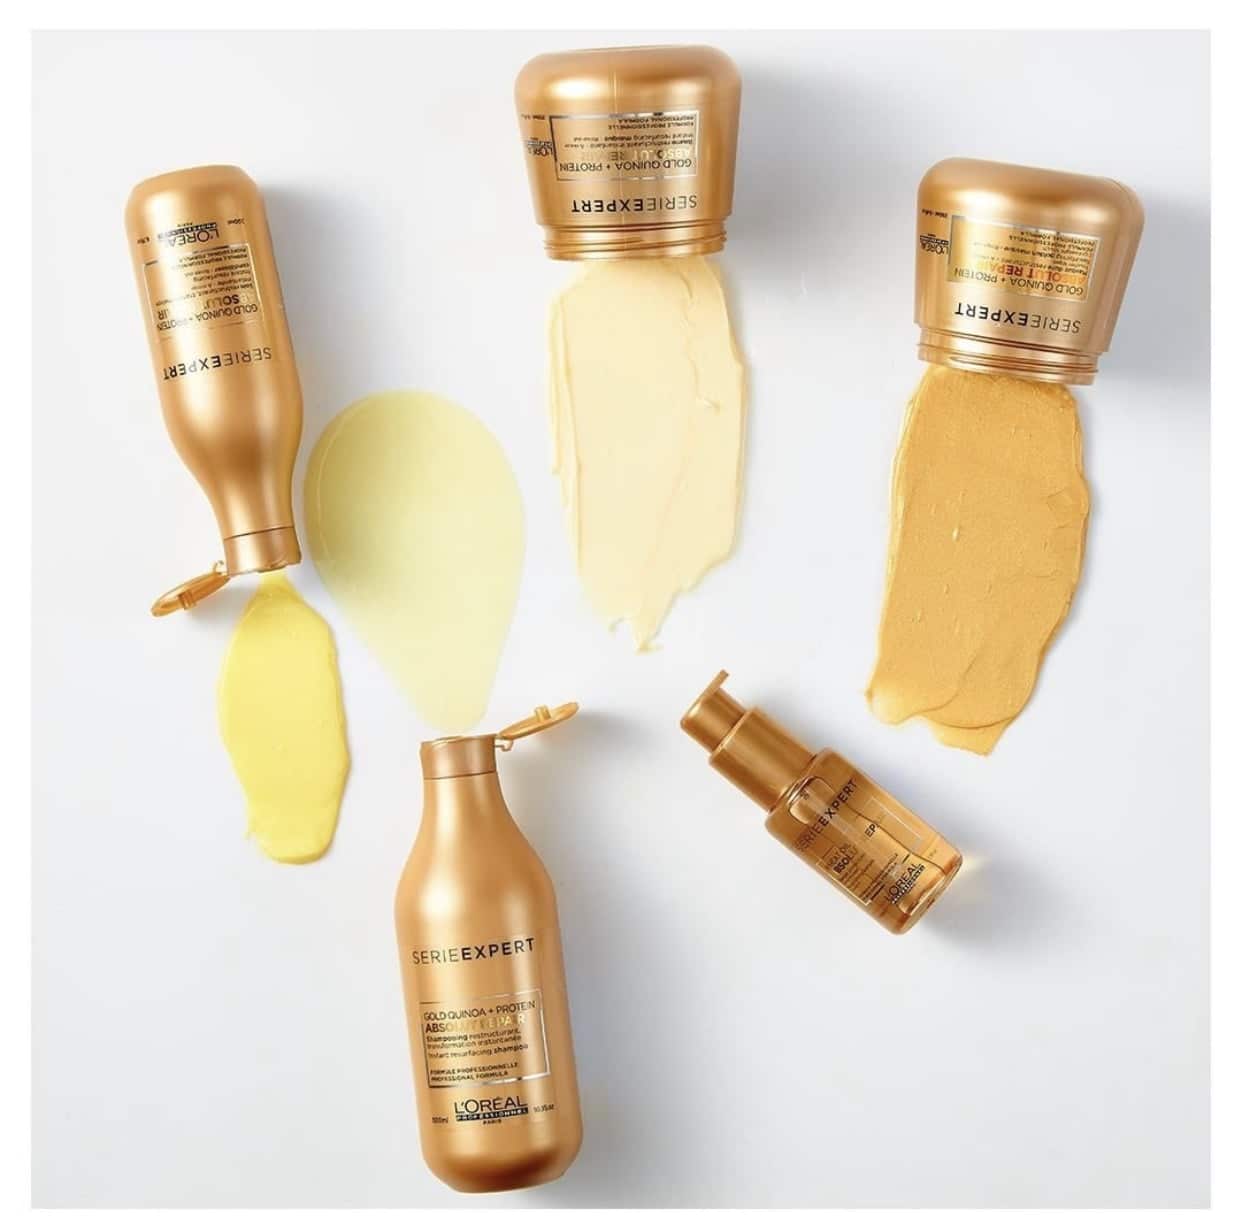 The Gold Standard of Haircare is here!